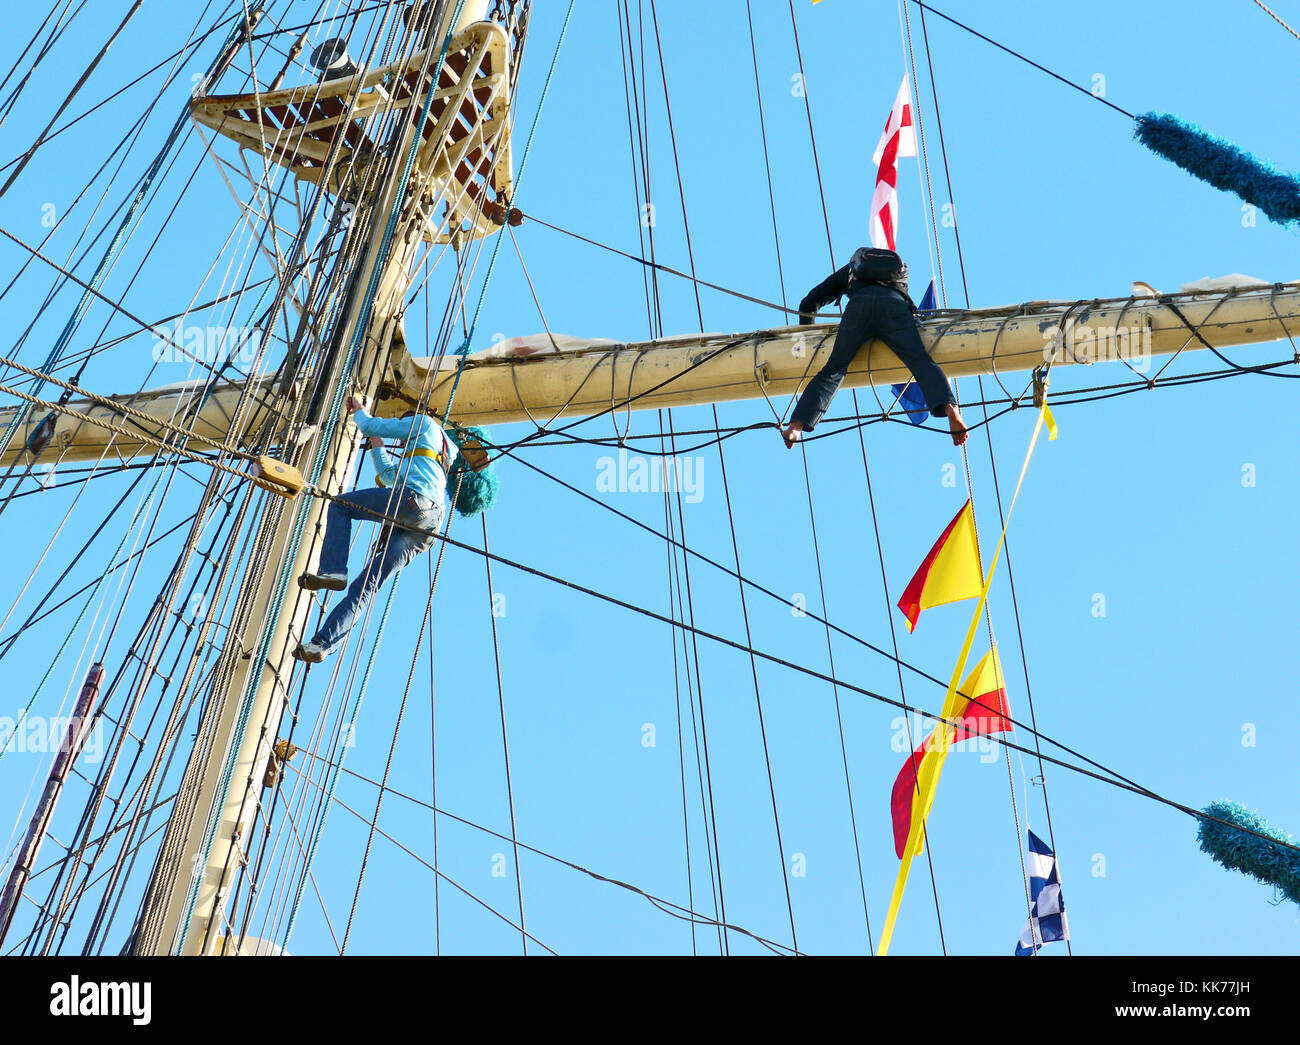 Sailors working  high up on a sailship in the harbour of Ystad, Sweden Stock Photo